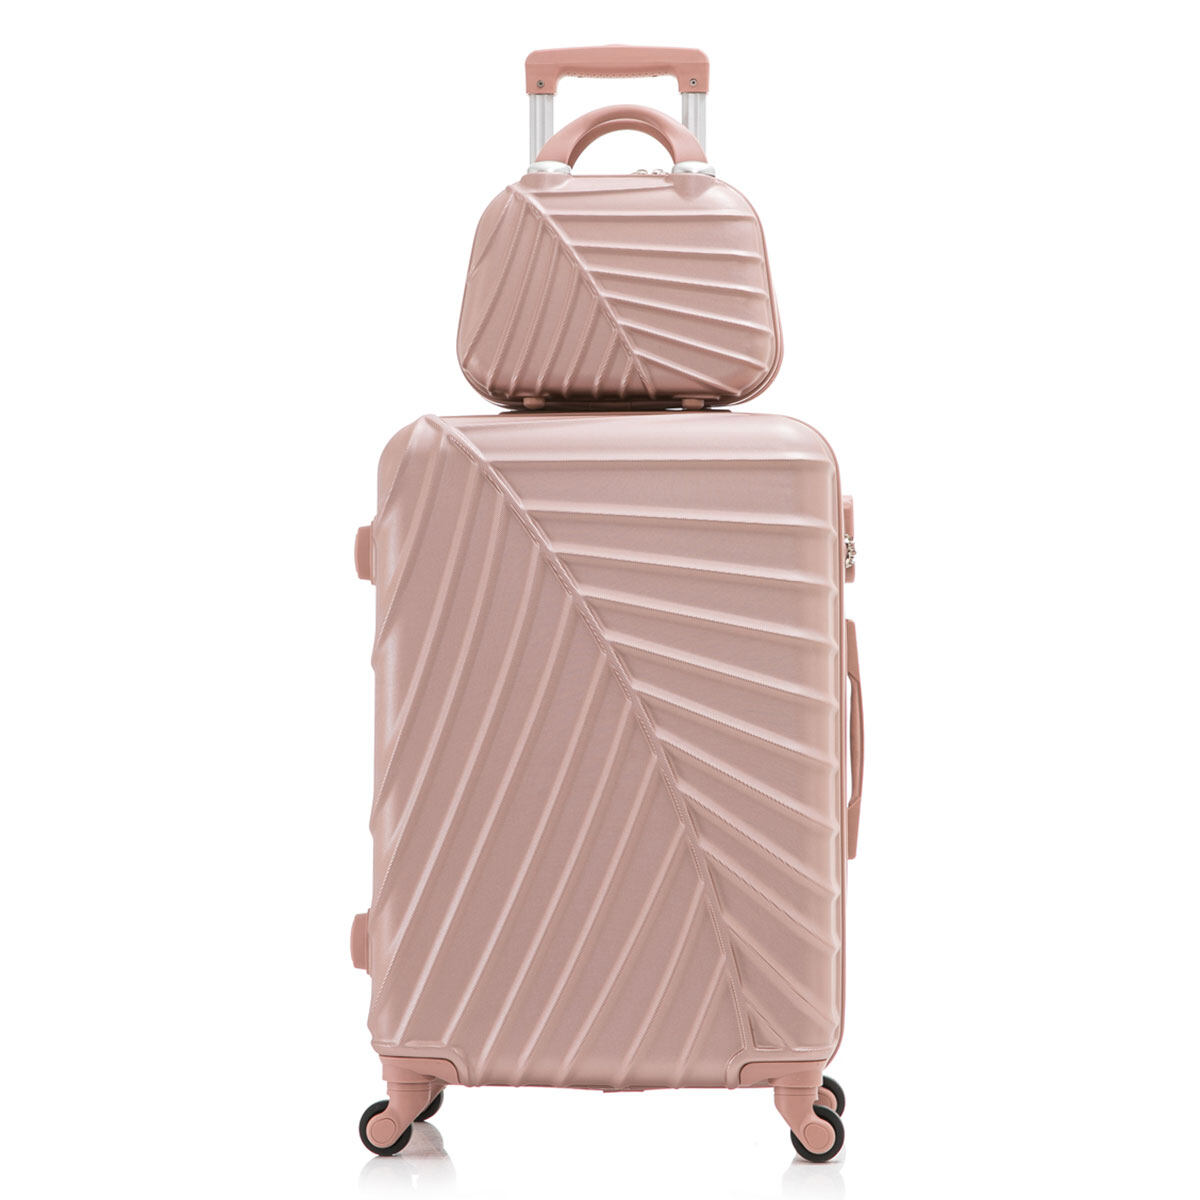 Outdoor Luggage & Travel Bags